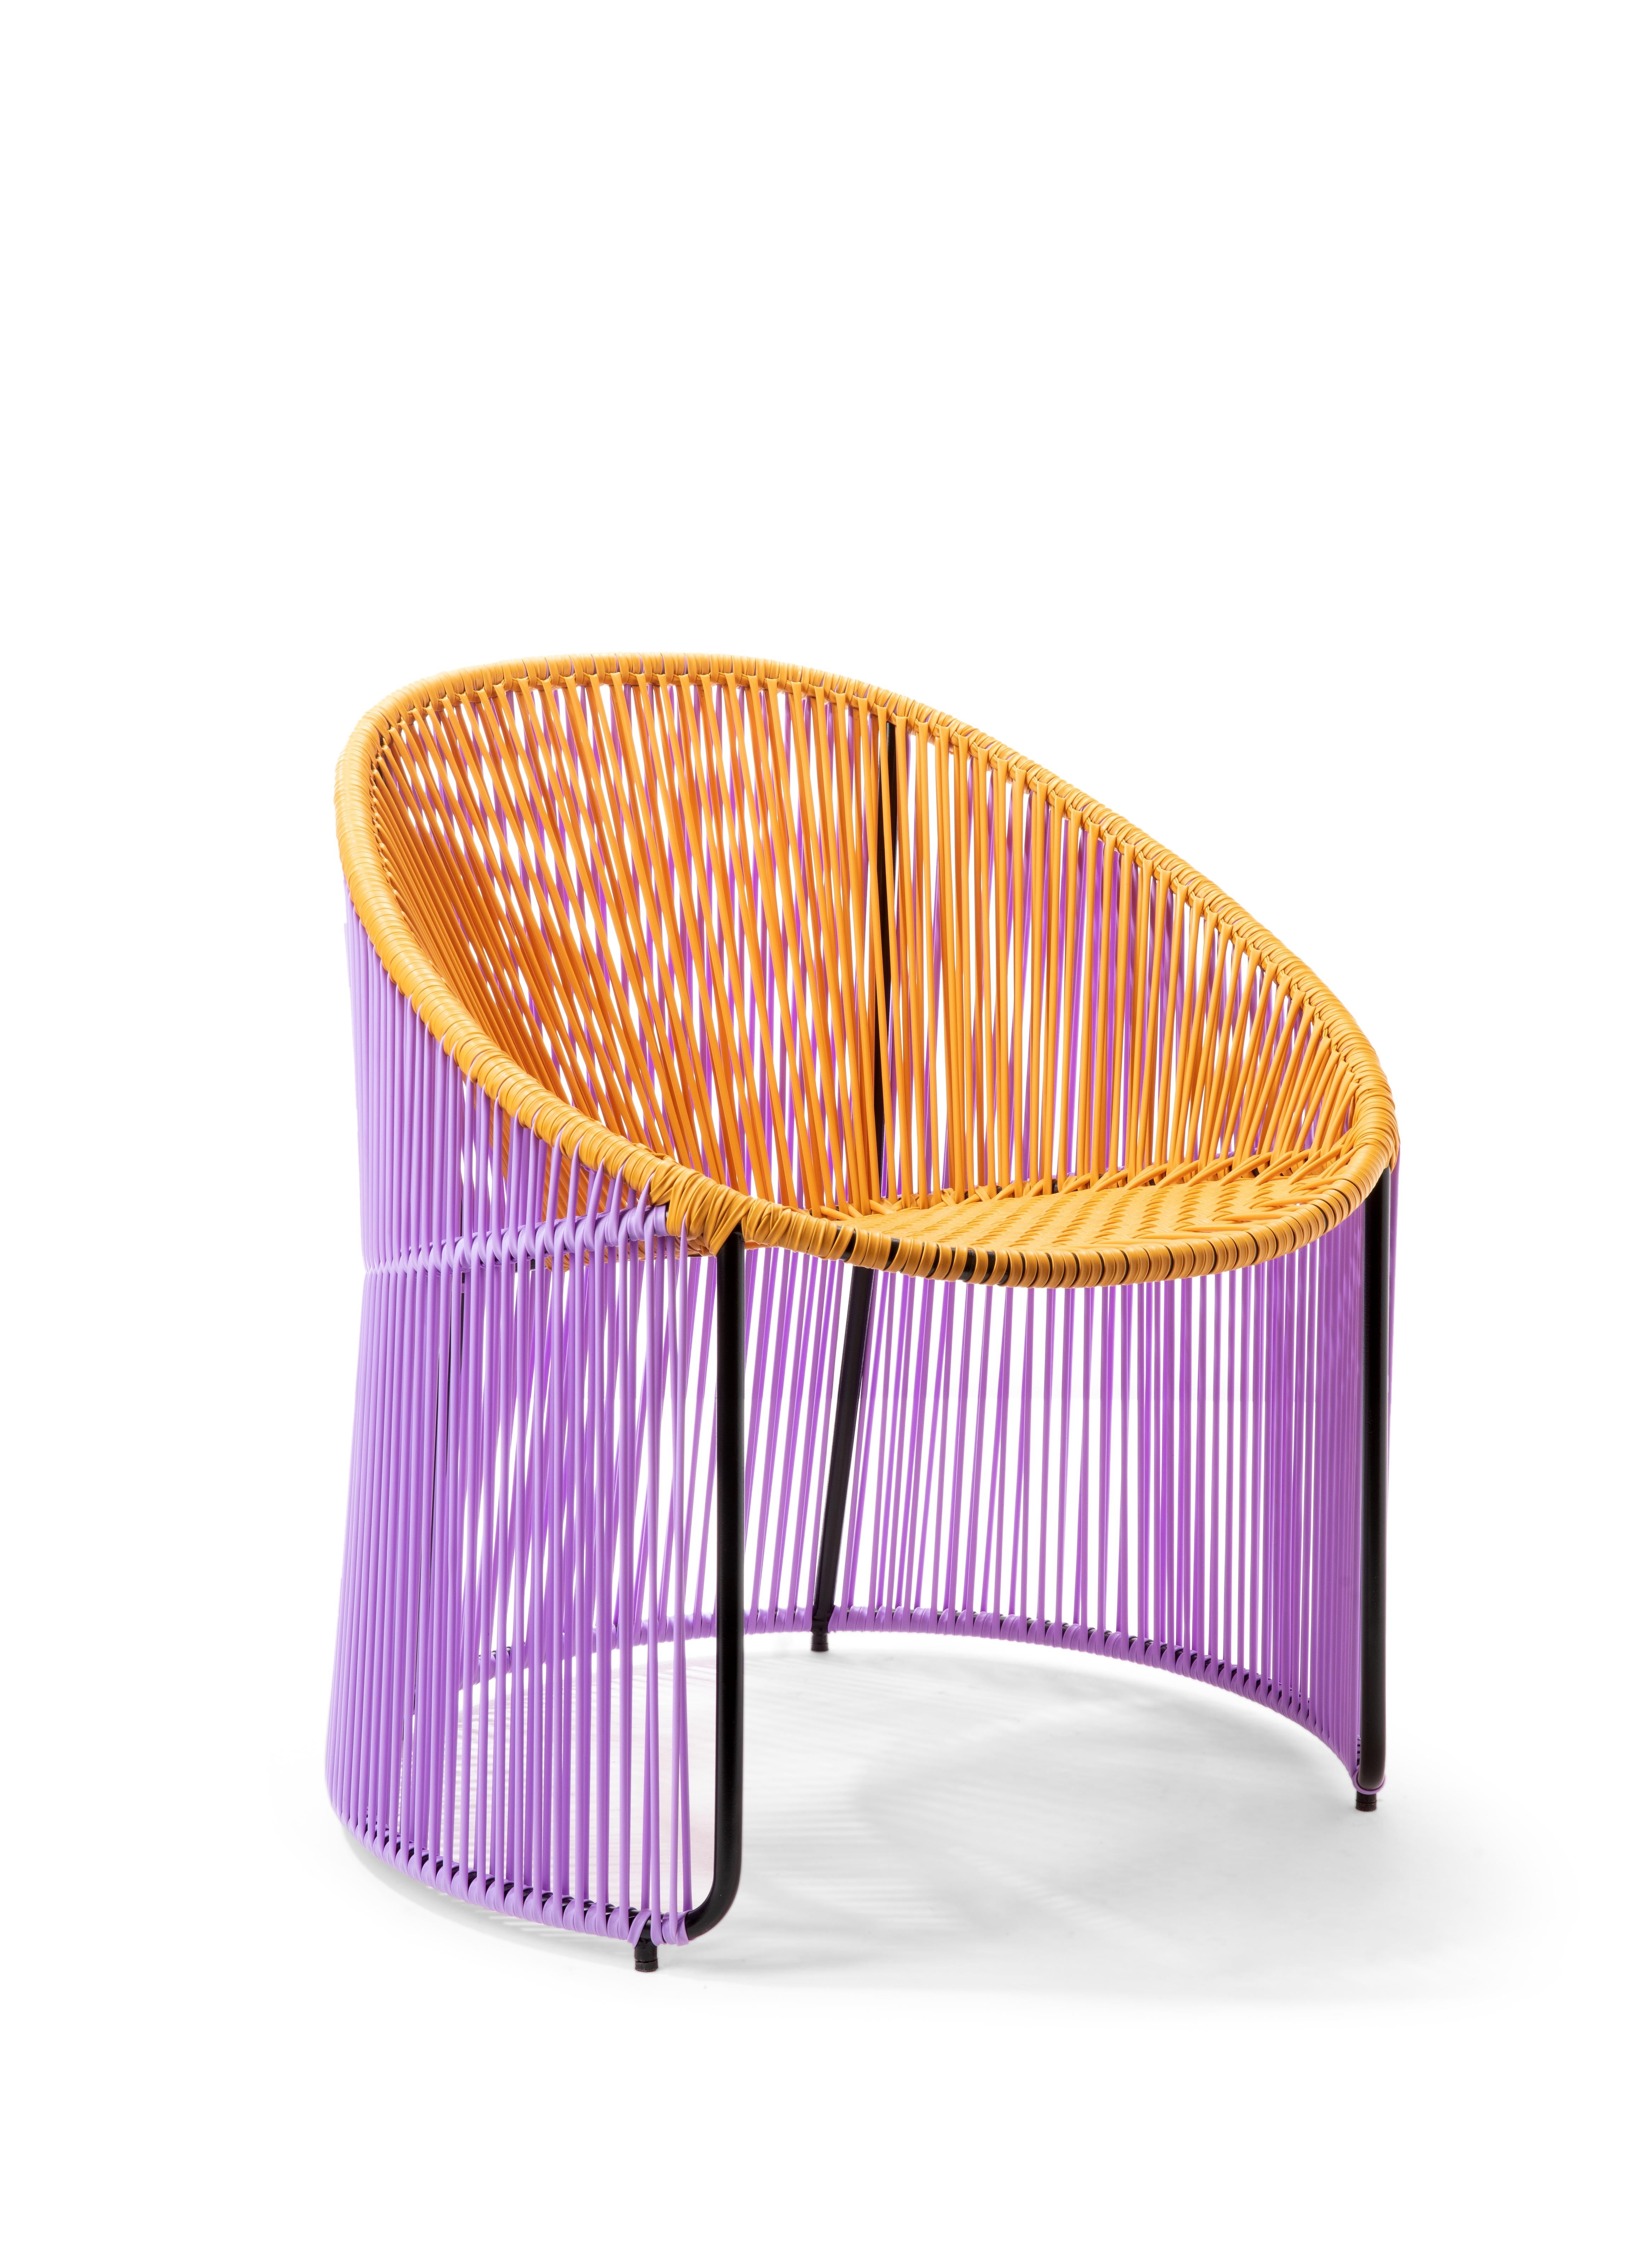 Set of 4 Honey Cartagenas lounge chair by Sebastian Herkner
Materials: PVC strings. Galvanized and powder-coated tubular steel frame
Technique: made from recycled plastic. Weaved by local craftspeople in Colombia. 
Dimensions: W 64 x D 70 x H 74